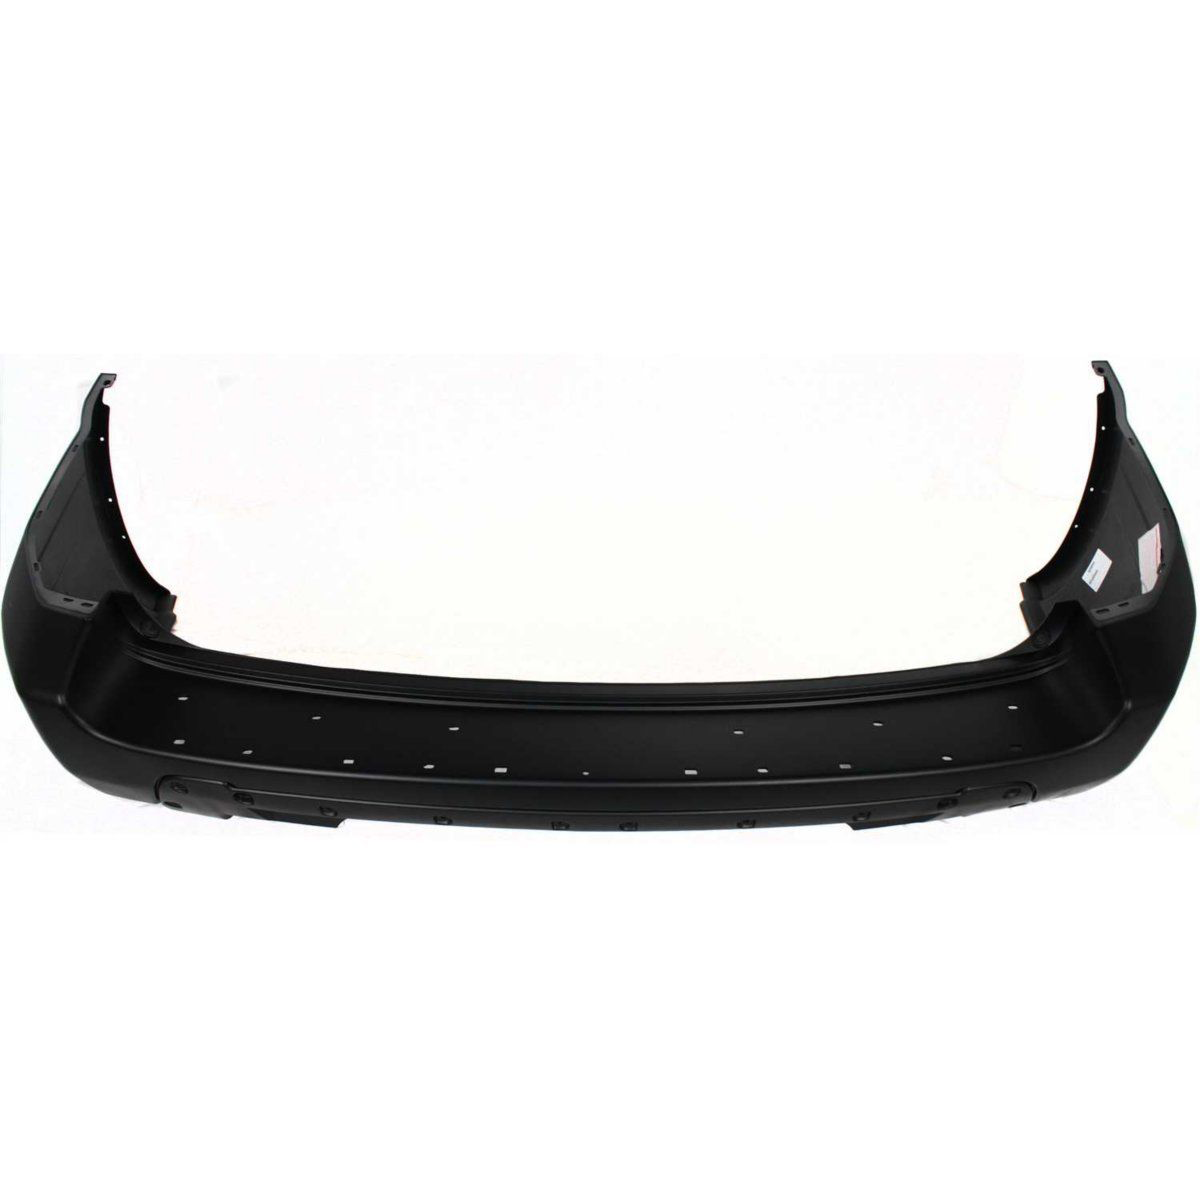 2003-2005 HONDA PILOT Rear Bumper Cover Painted to Match